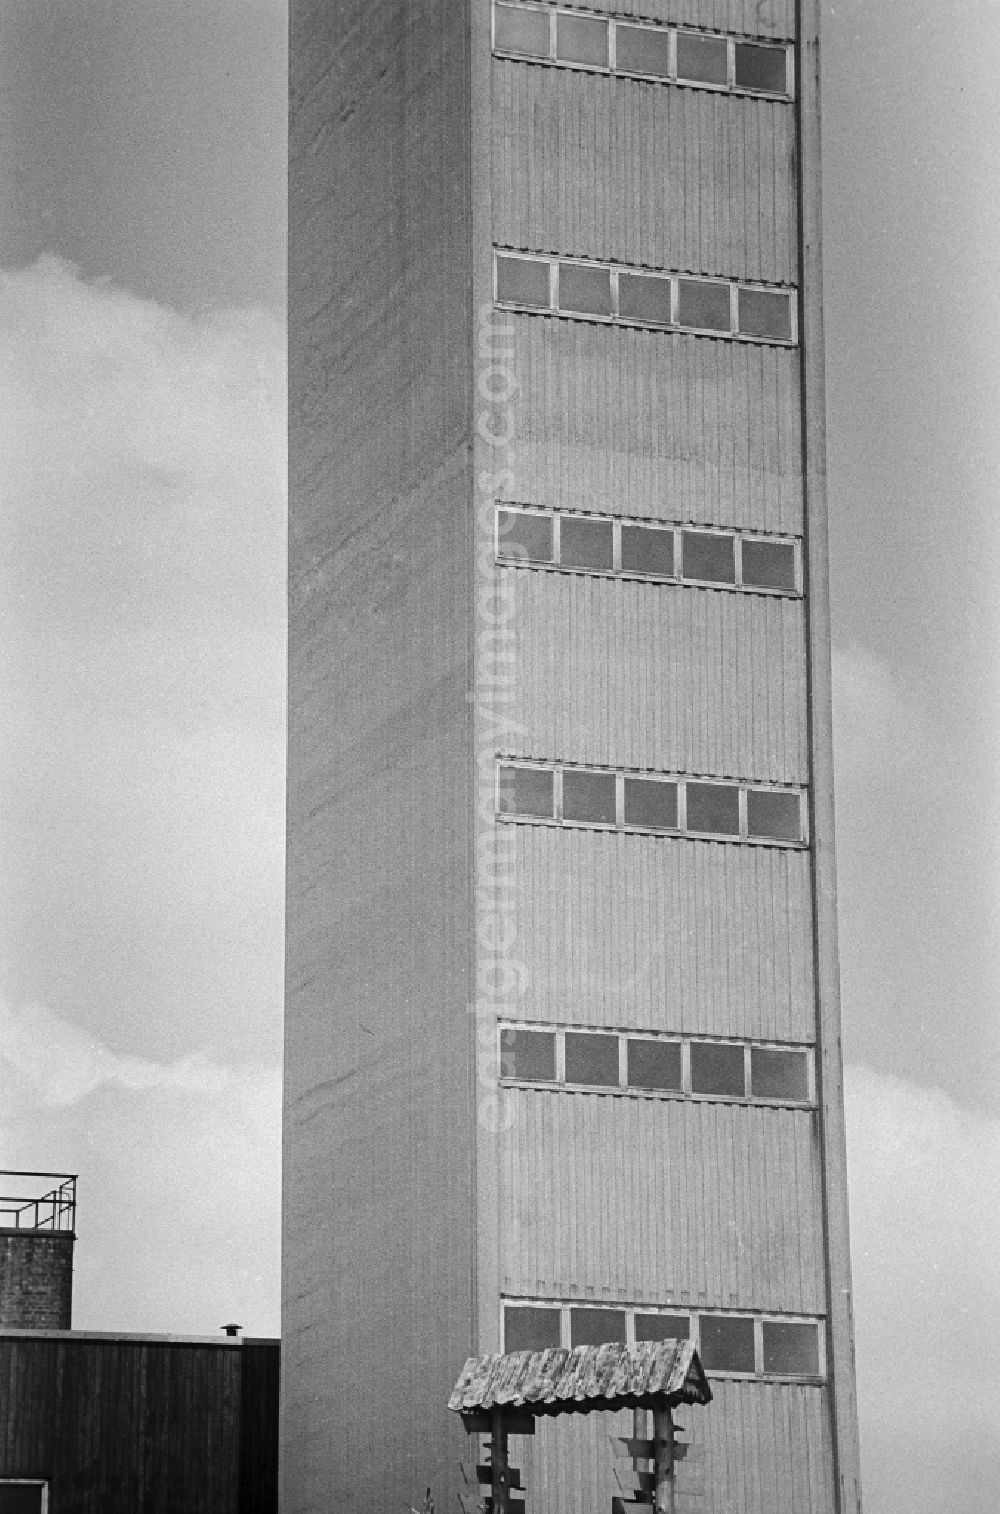 GDR picture archive: Oberwiesenthal - The observation tower at the Fichtelberghaus in Oberwiesenthal in the federal state of Saxony on the territory of the former GDR, German Democratic Republic